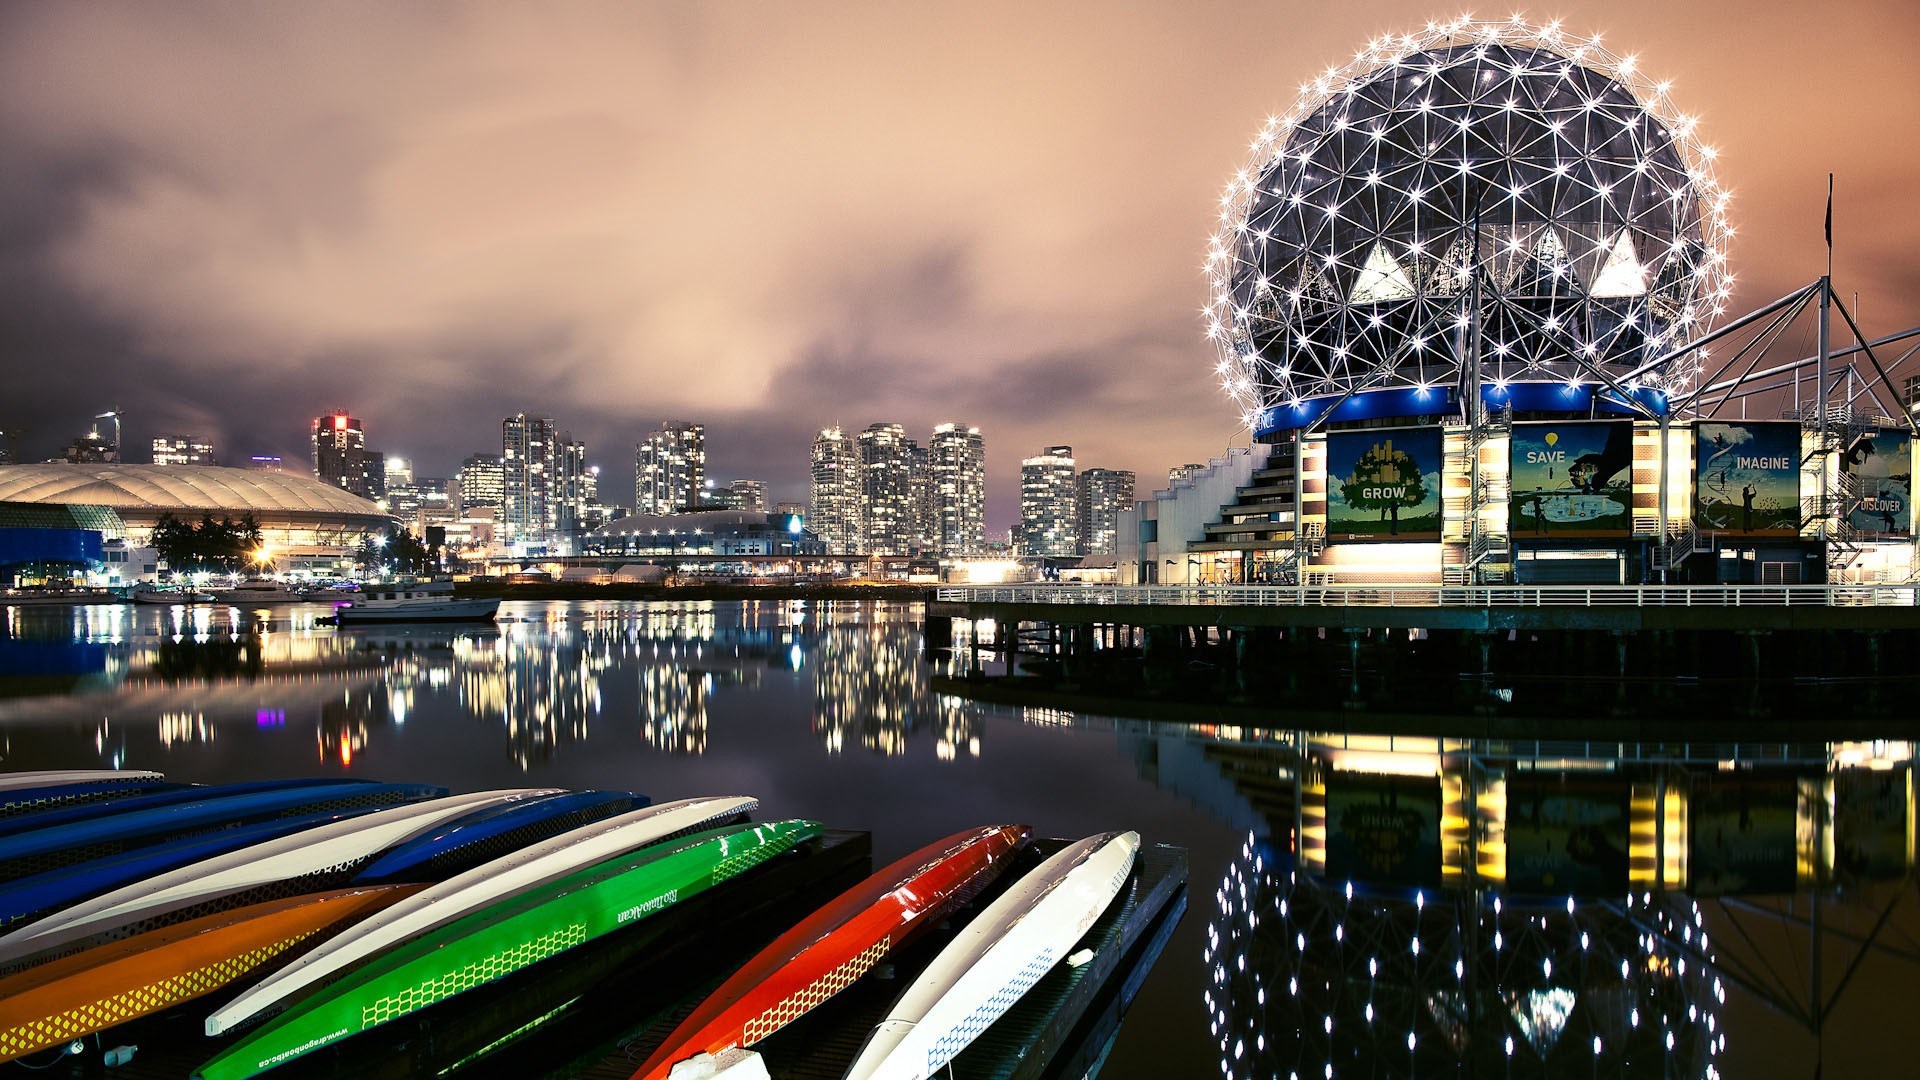 architecture, Building, Cityscape, Skyscraper, City, Evening, Boat, Vancouver, Canada, City lights, Reflection, Water, Sphere, Clouds, Long exposure, Canoes Wallpaper